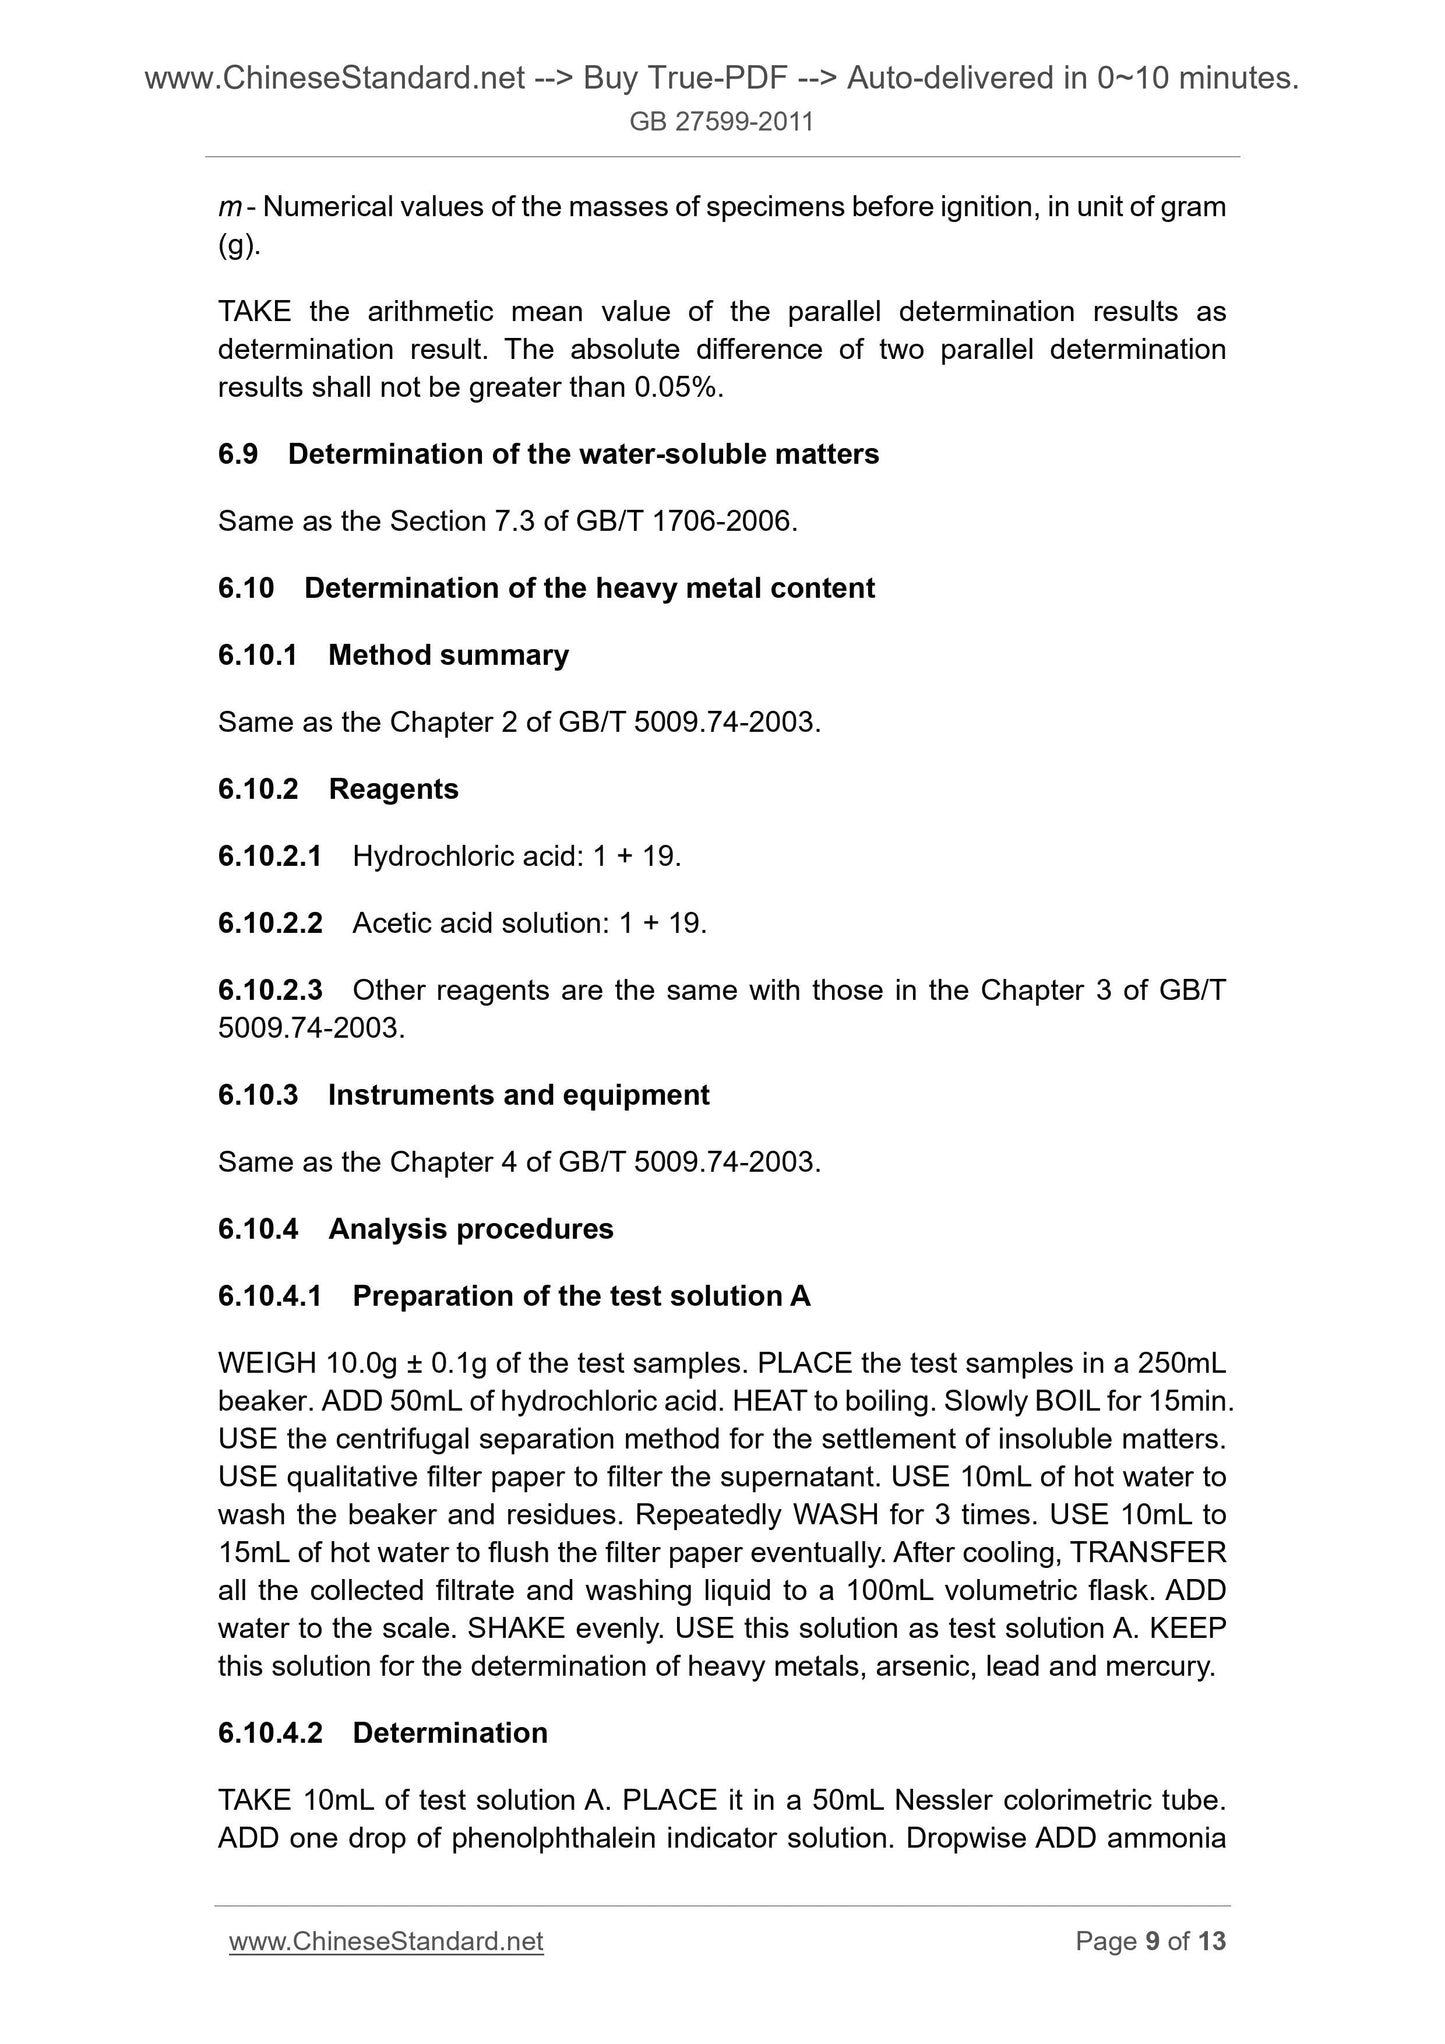 GB 27599-2011 Page 6